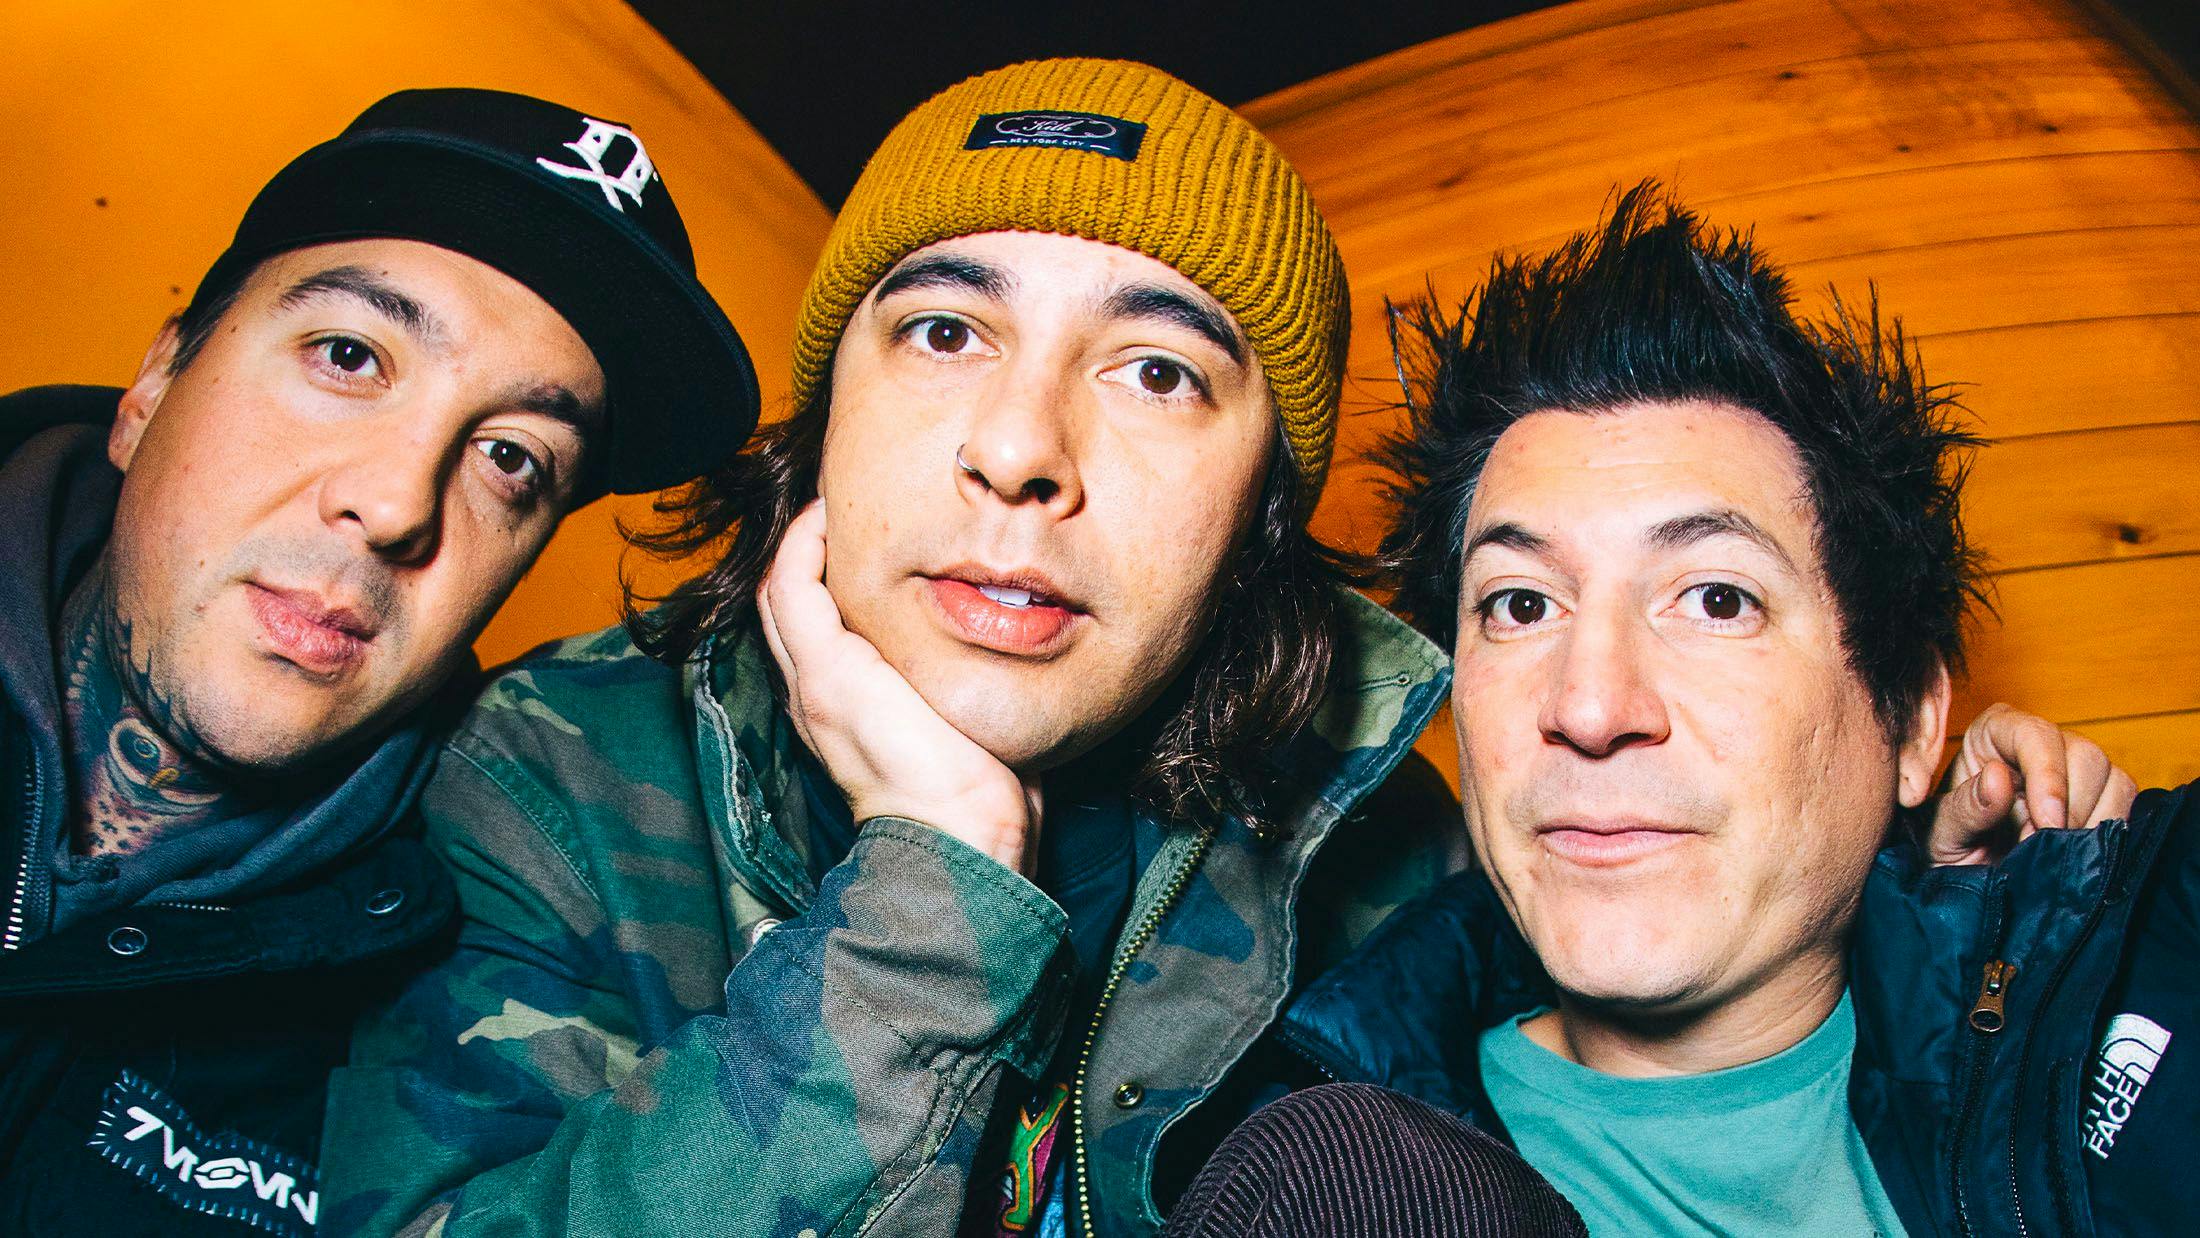 Get your A3 Pierce The Veil Kerrang! cover poster